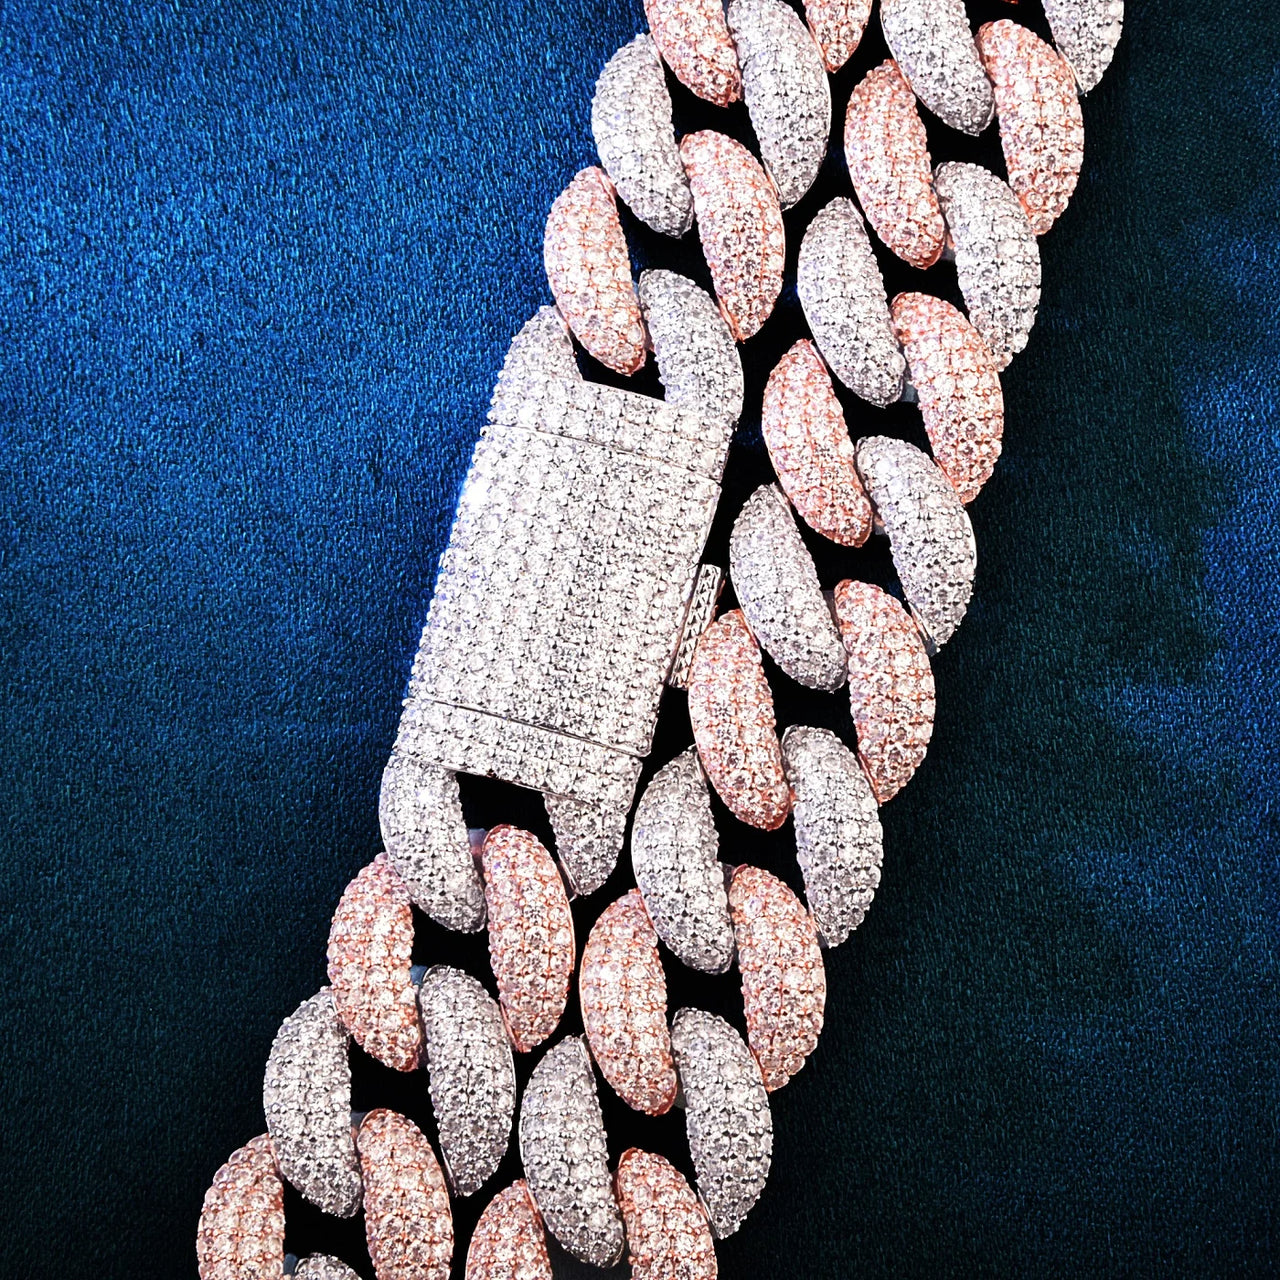 19mm Iced Two Tone Miami Cuban Link Bracelet - Different Drips